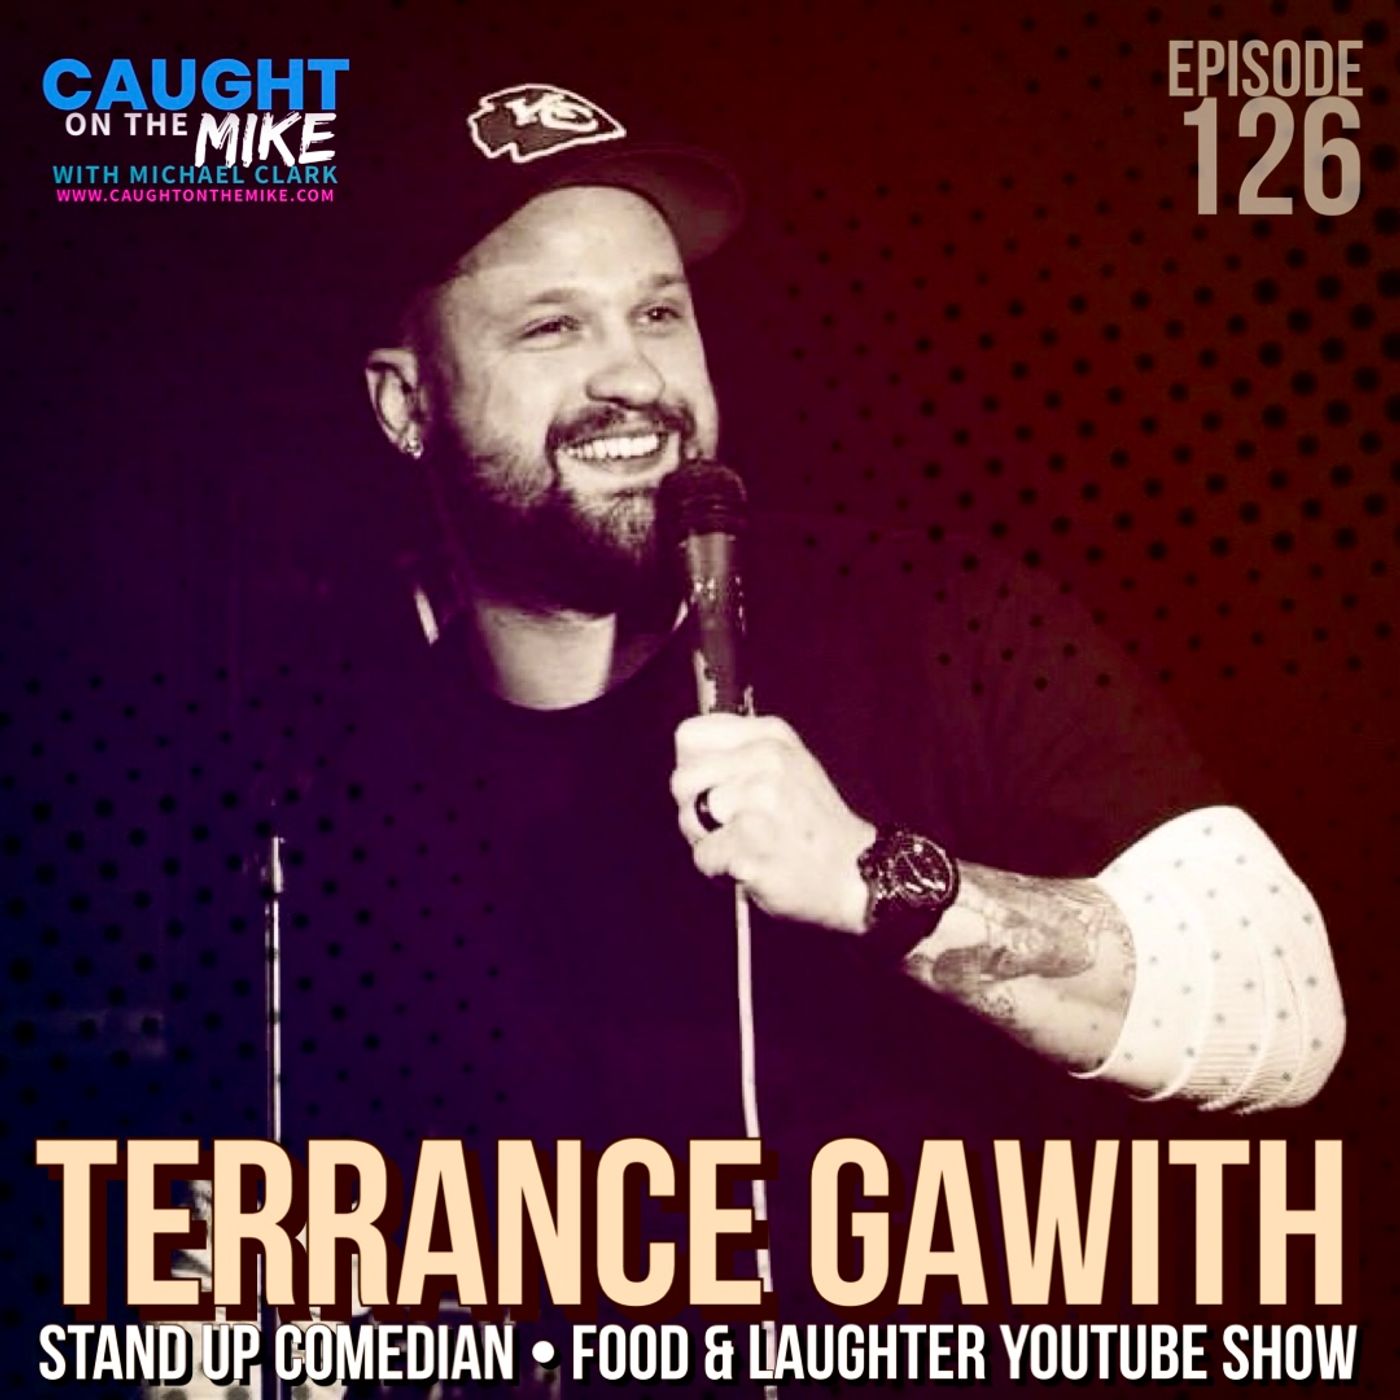 Comedian- Terrance Gawith of "Food & Laughter"